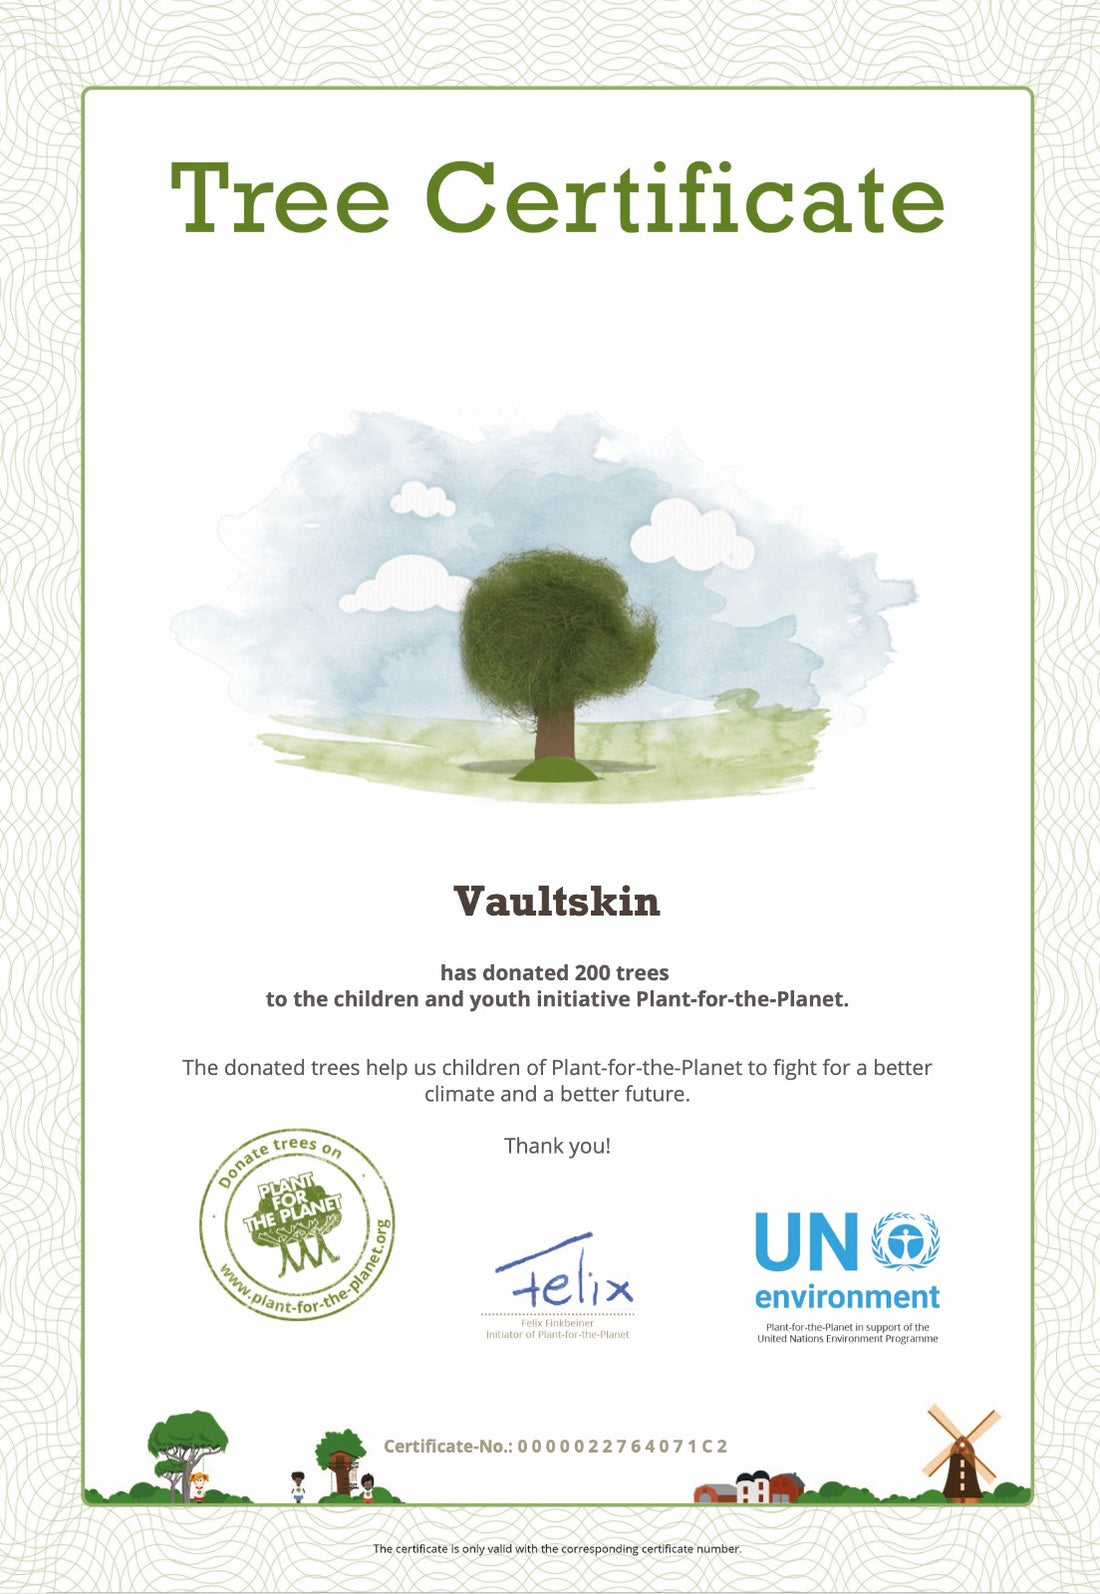 A certificate confirming the donation of 200 trees